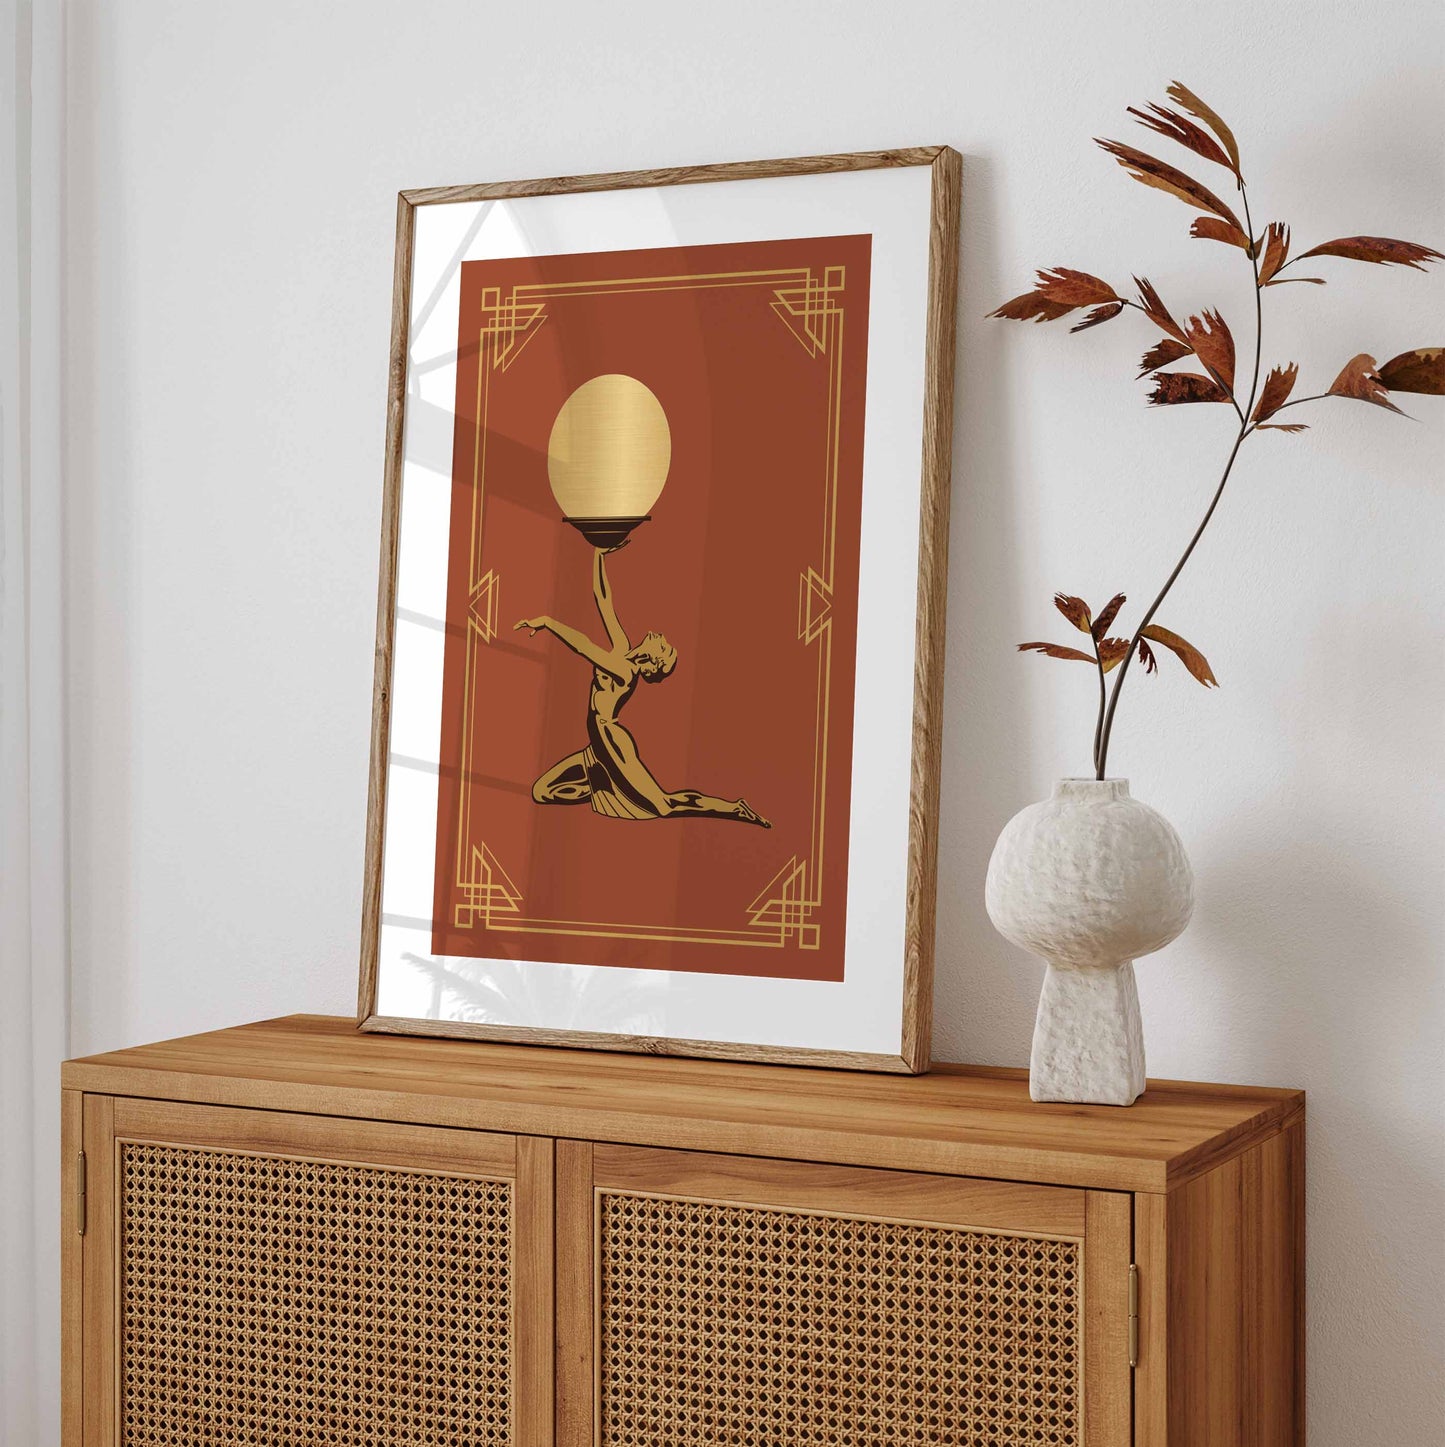 Wall art print in an art deco style in orange and gold